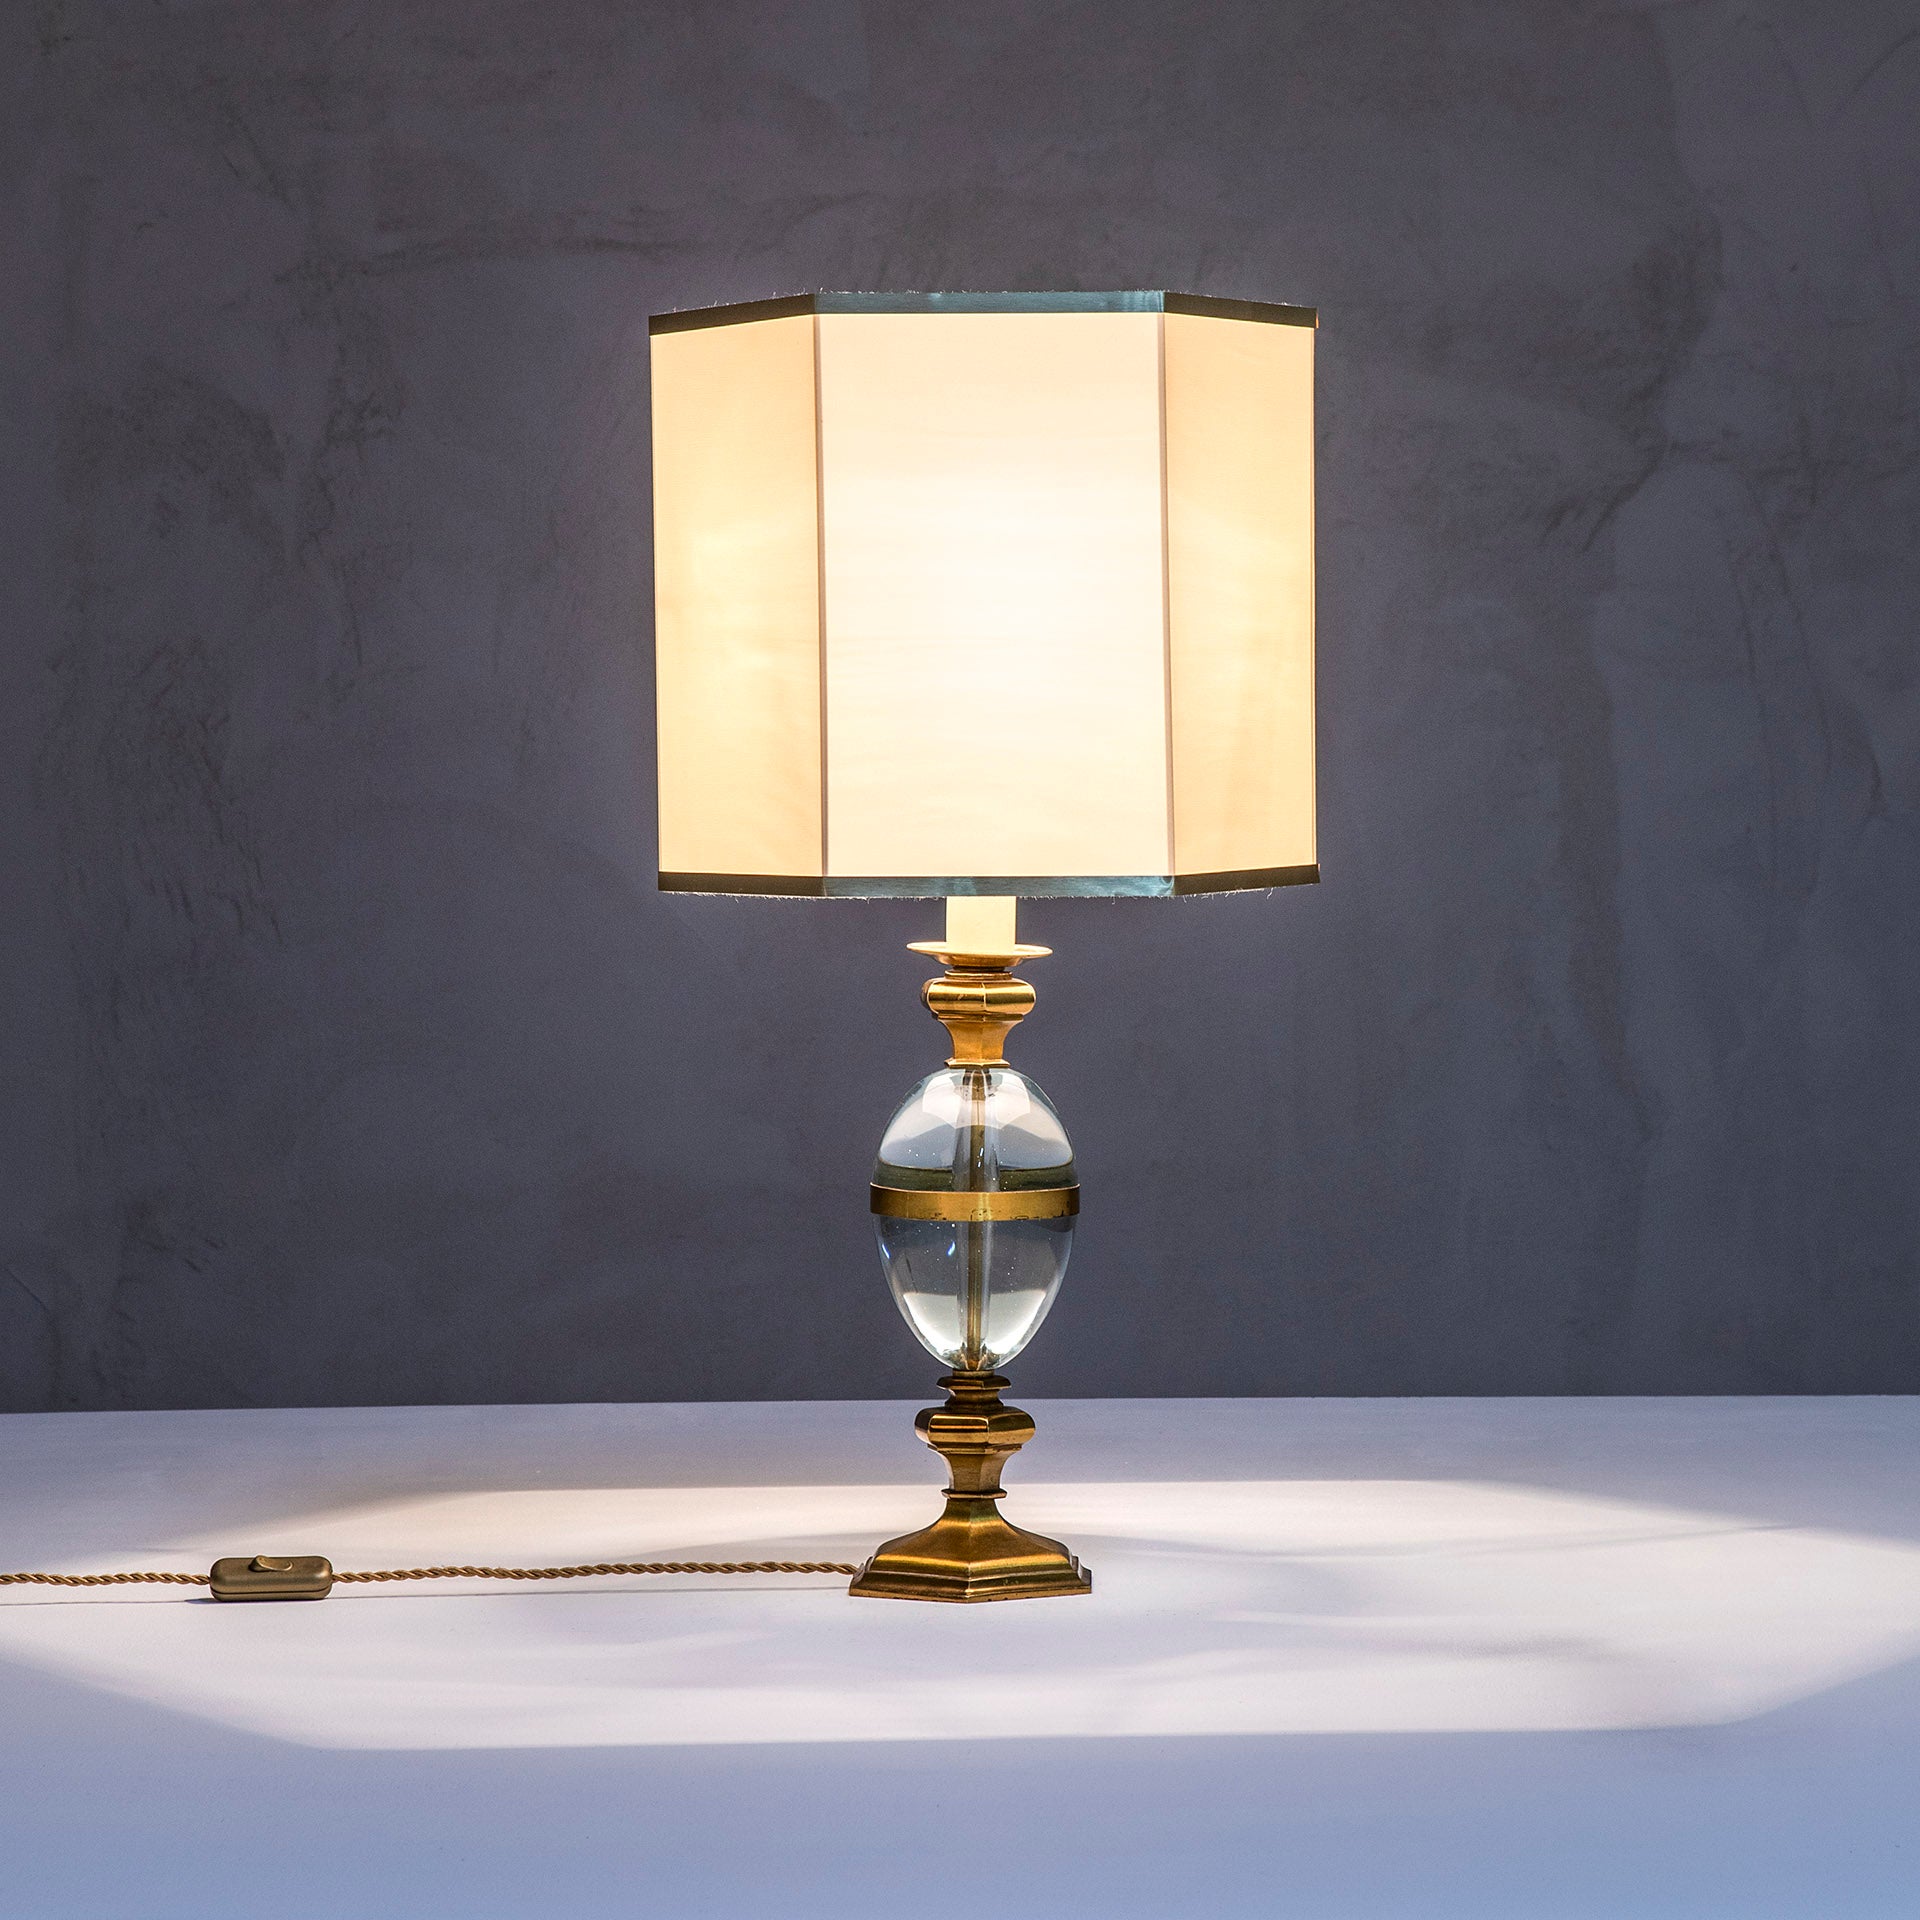 20th Century Gabriella Crespi Table Lamp in Brass and Glass and Fabric Lampshade